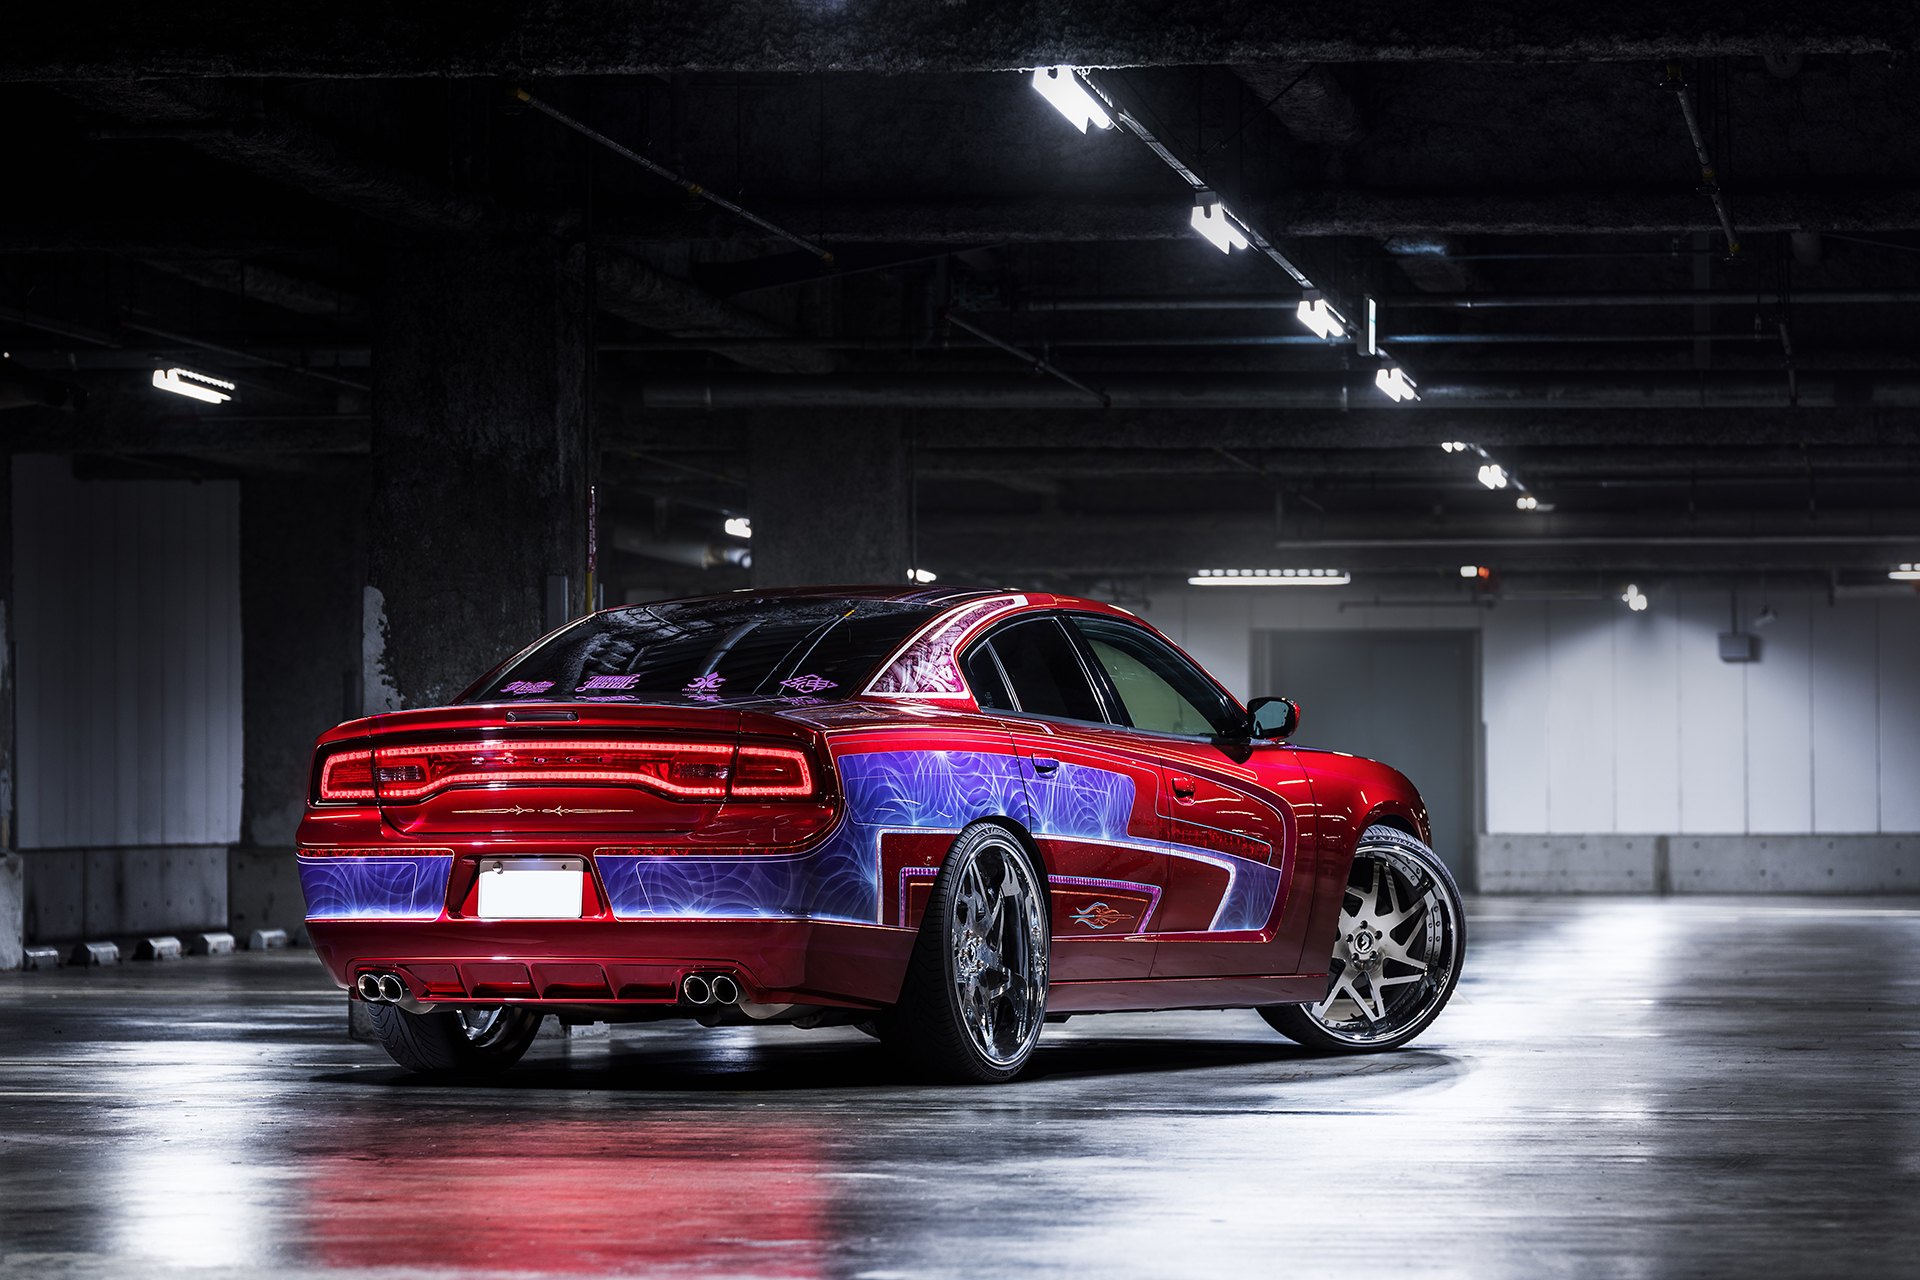 Red Dodge Charger with Custom Rear Diffuser - Photo by Forgiato